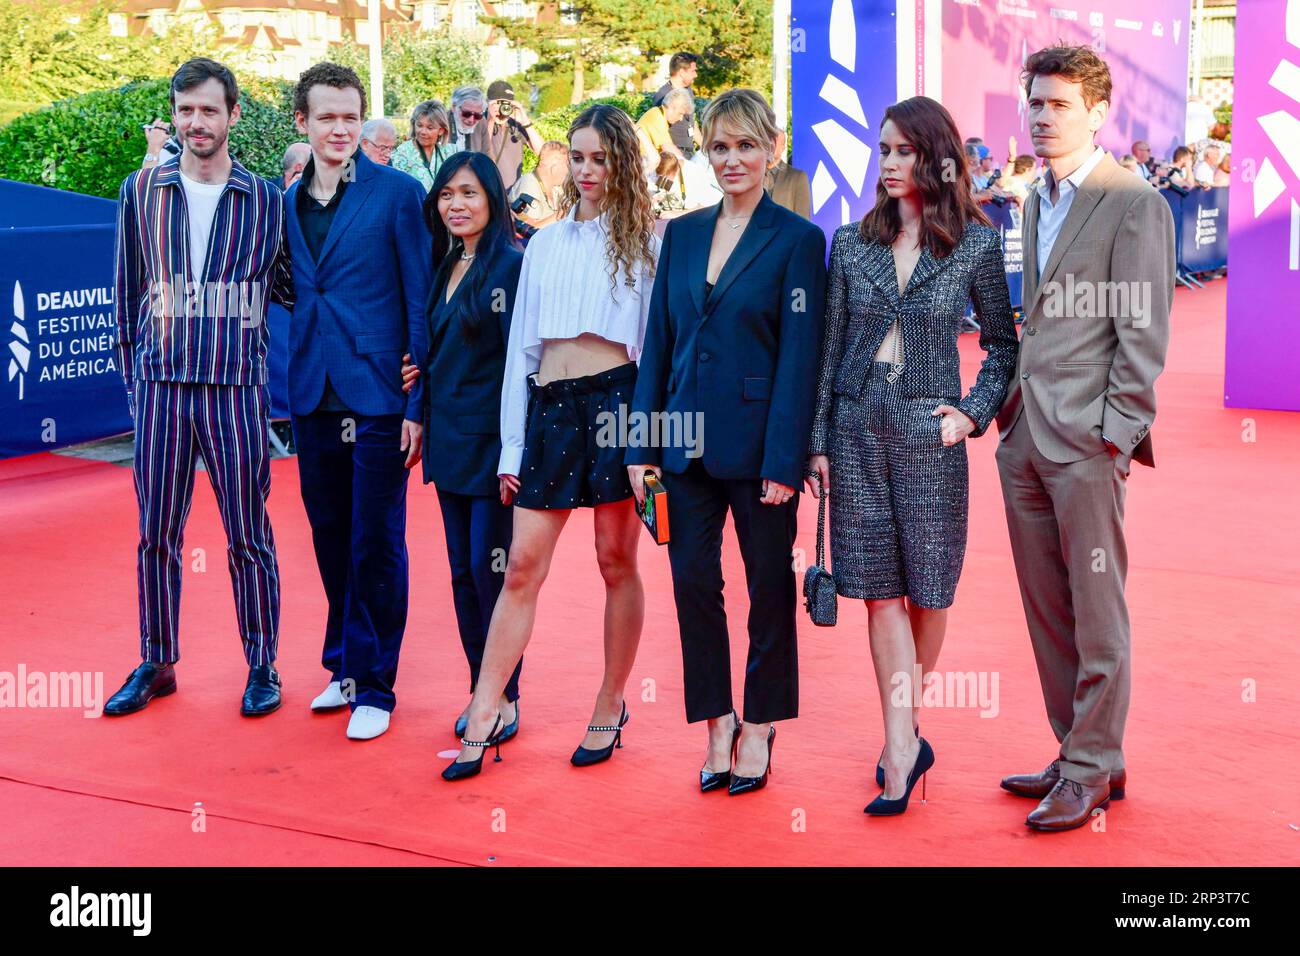 Deauville, France. 02nd Sep, 2023. Richard Sears, Noe Boon, Gina Cailin, Tess Barthelemy, Judith Godreche, Liz Kingsman, Loic Corbery attend the 'Dogman' premiere during the 49th Deauville American Film Festival on September 02, 2023 in Deauville, France Photo by Shootpix/ABACAPRESS.COM Credit: Abaca Press/Alamy Live News Stock Photo